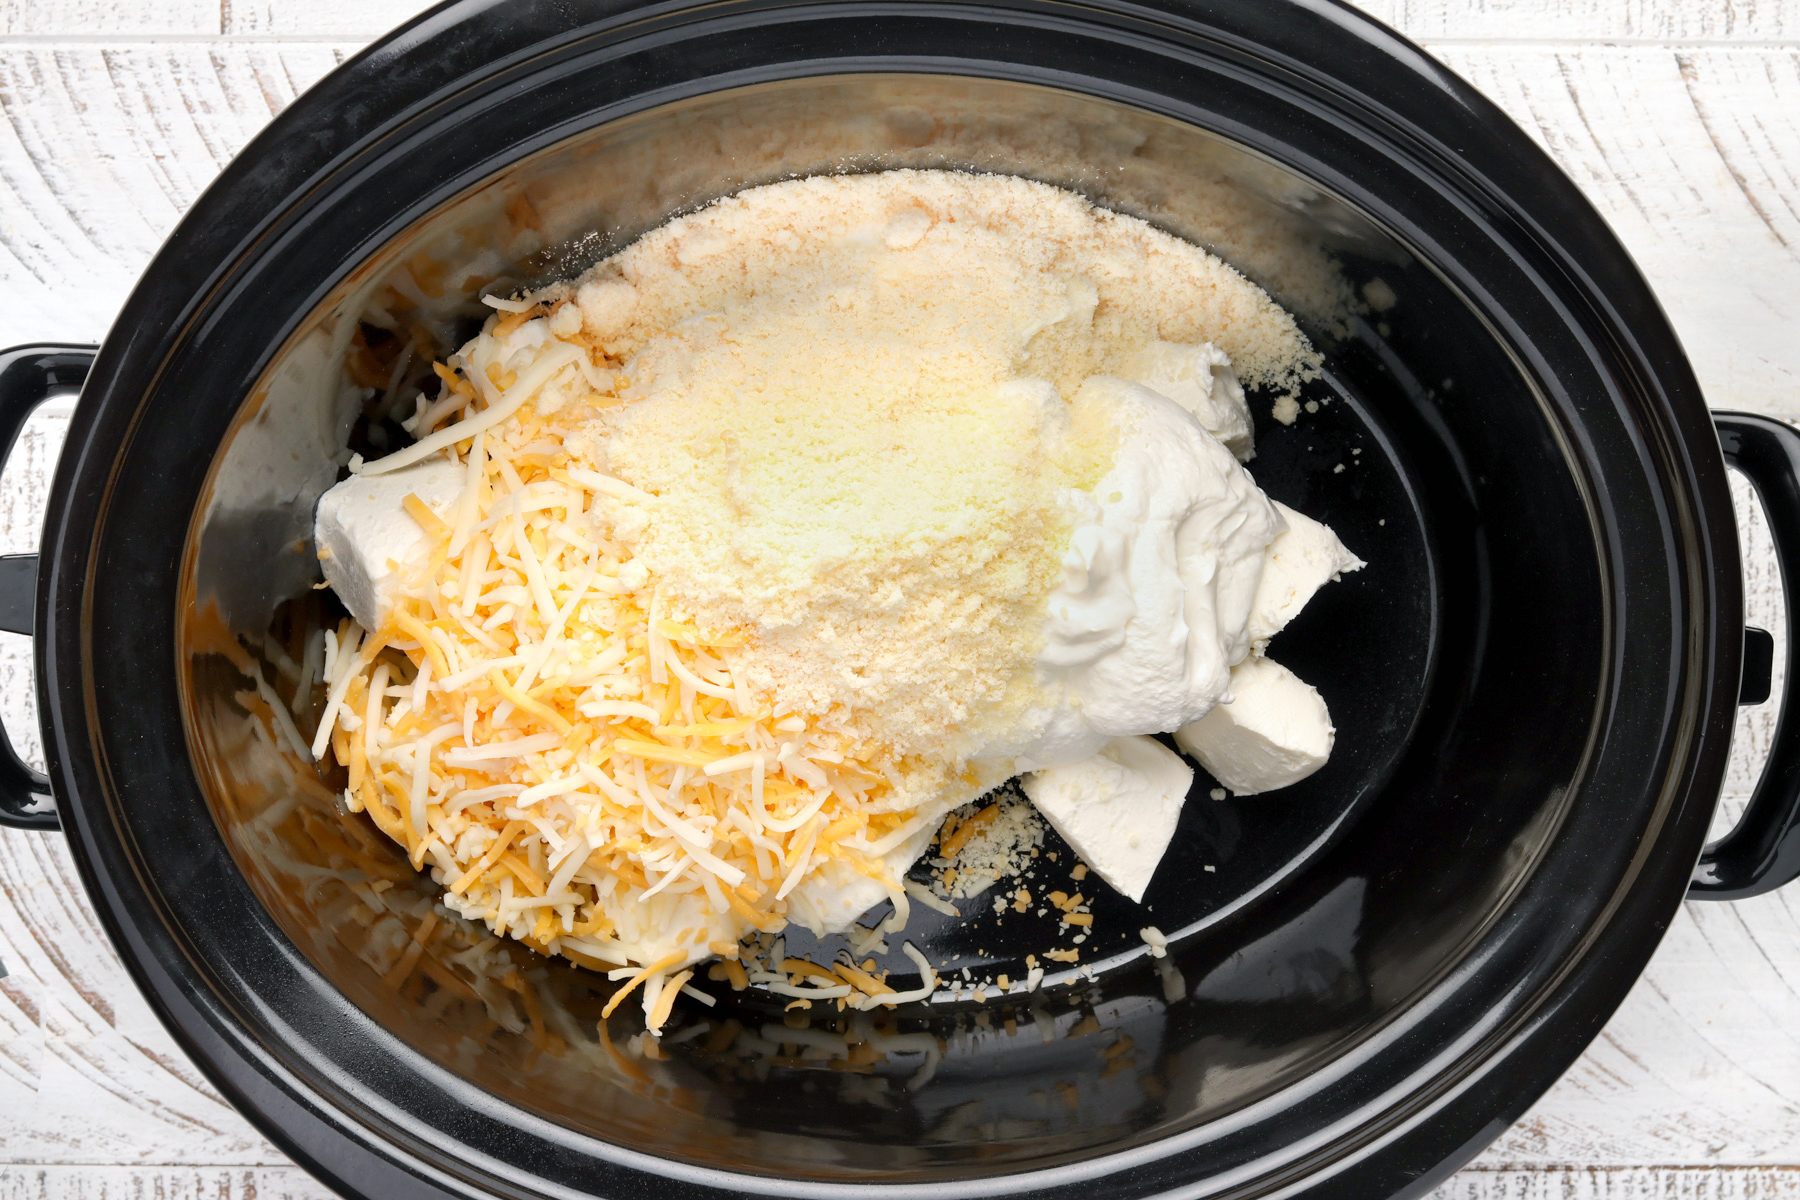 Step 1: Slow Cooker Jalapeno Popper Dip With Bacon. Put the cream cheese, cheddar and parmesan into the slow cooker.